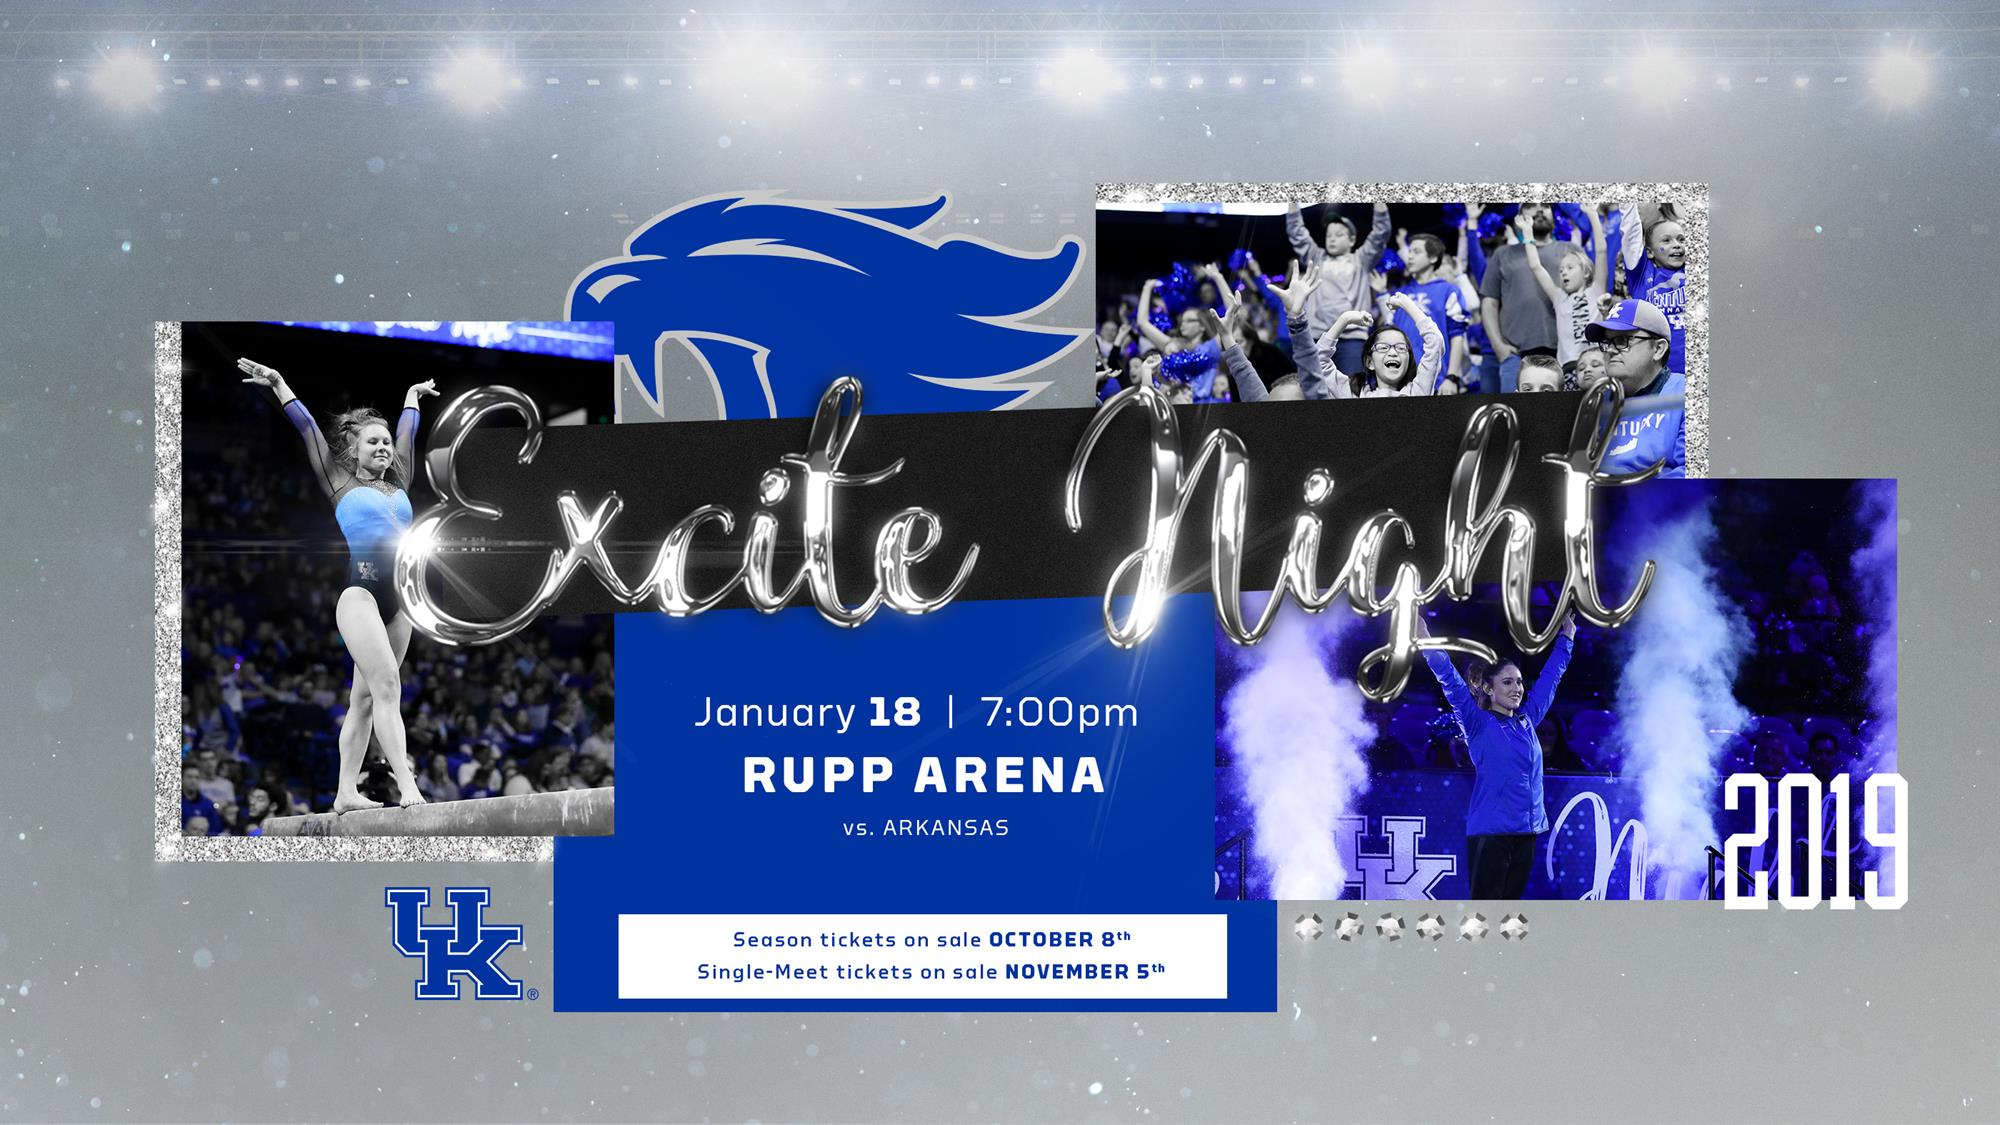 Kentucky Gymnastics Excite Night to be Held in Rupp Arena